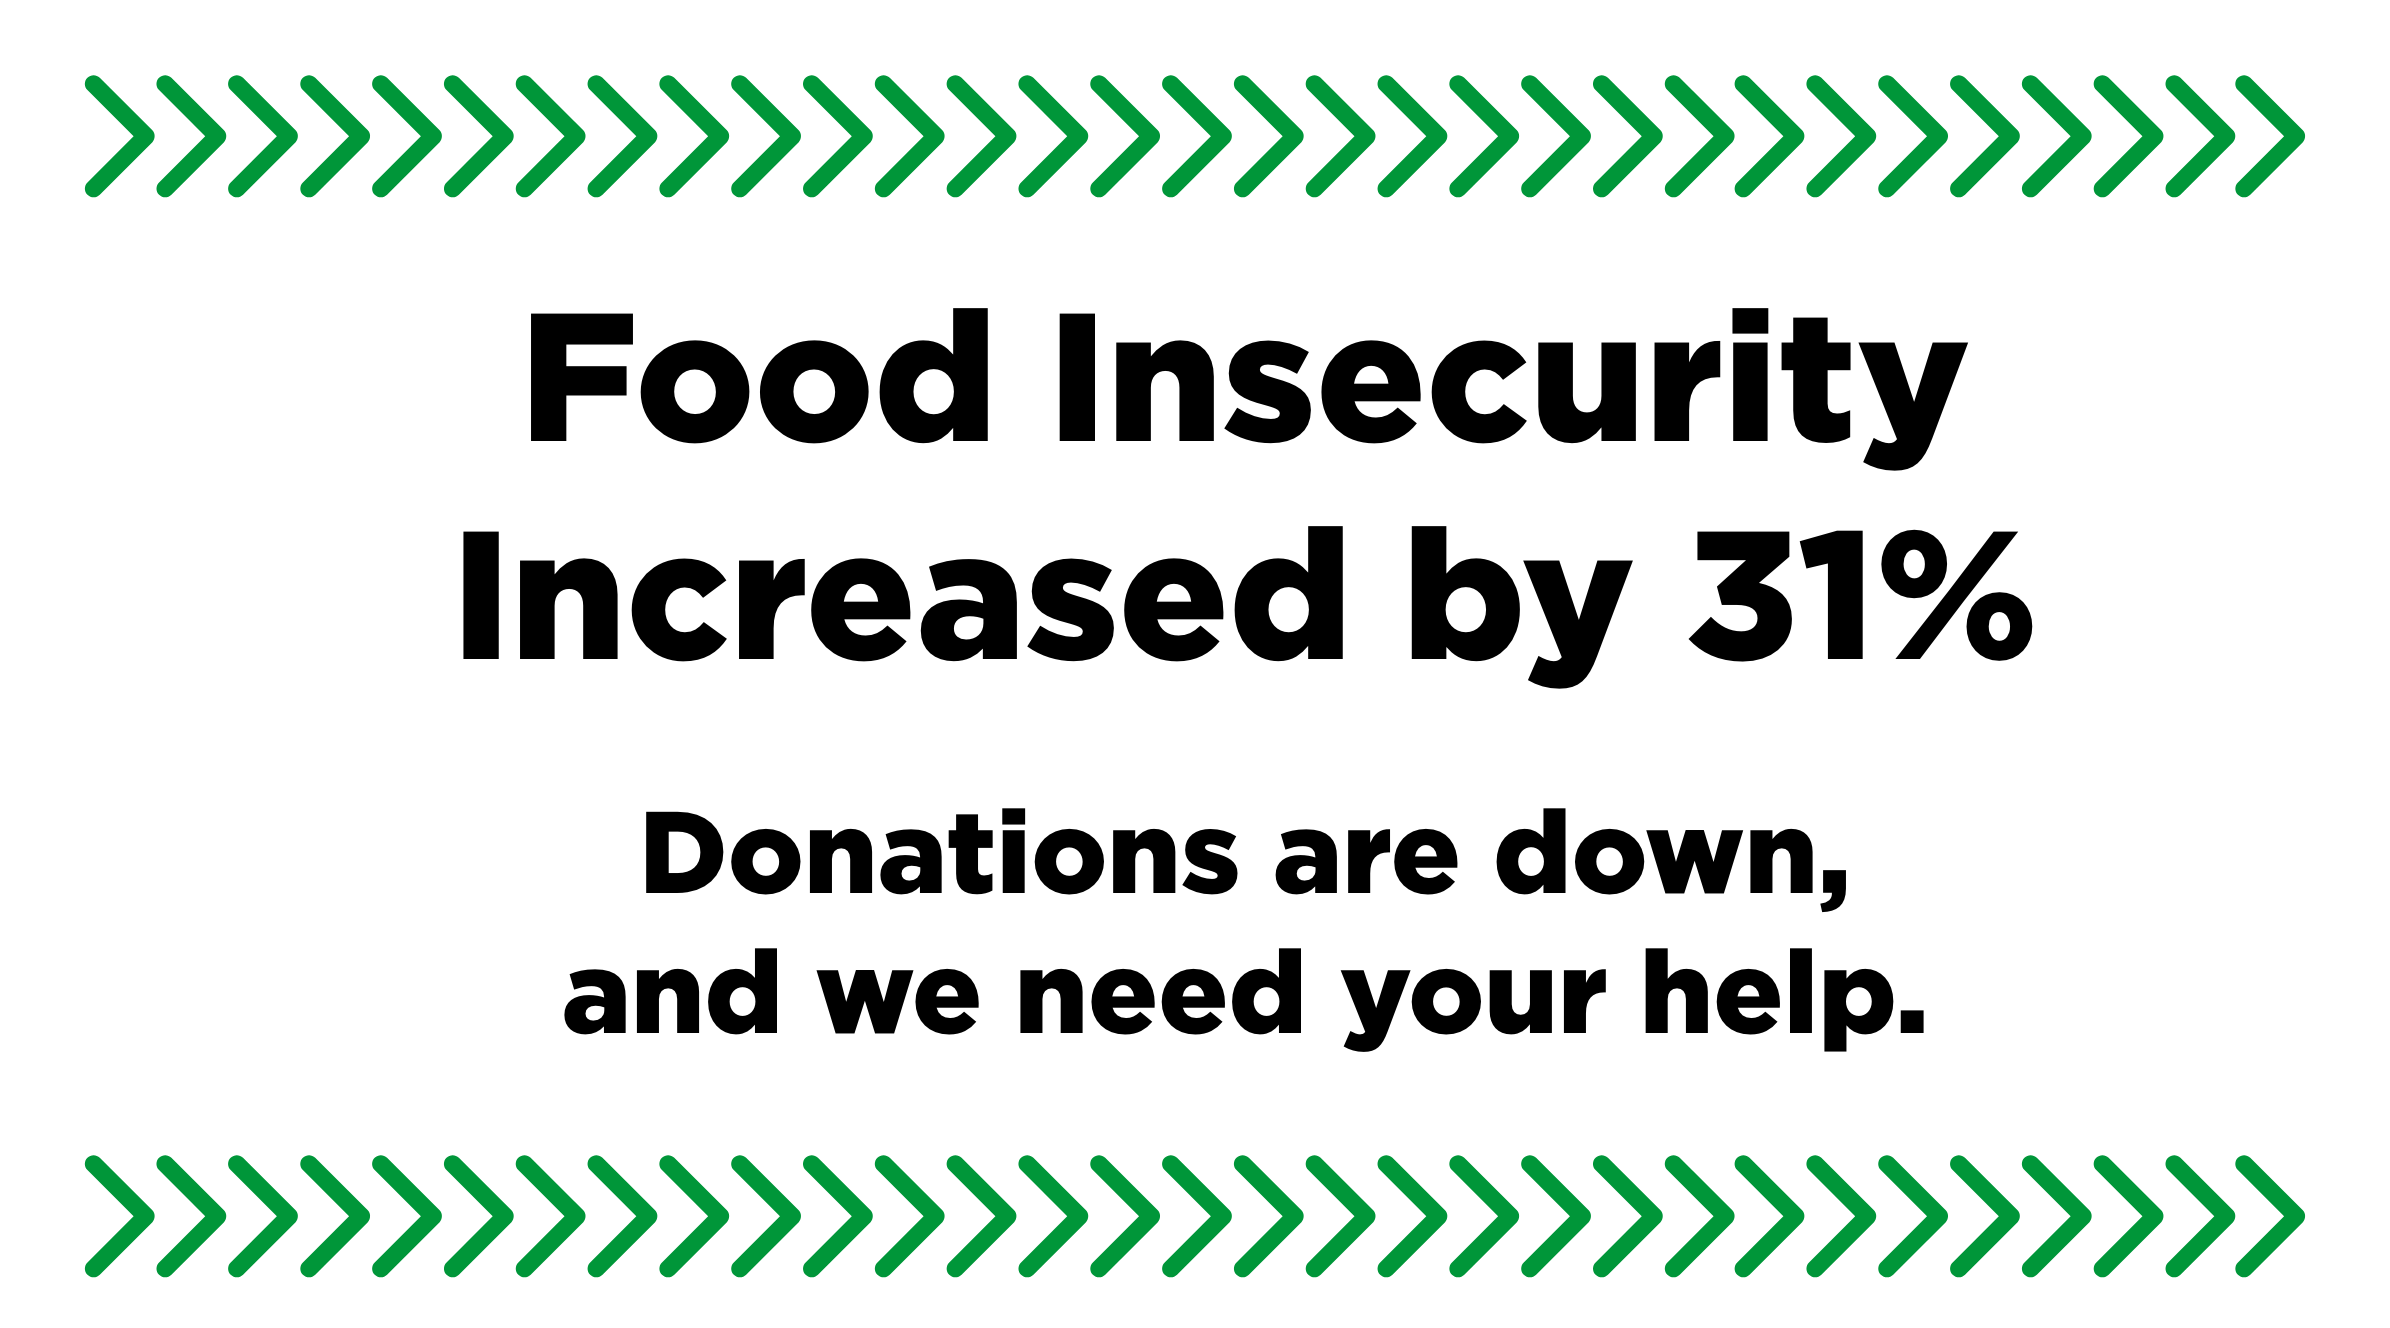 Show Your Commitment to Hunger Relief